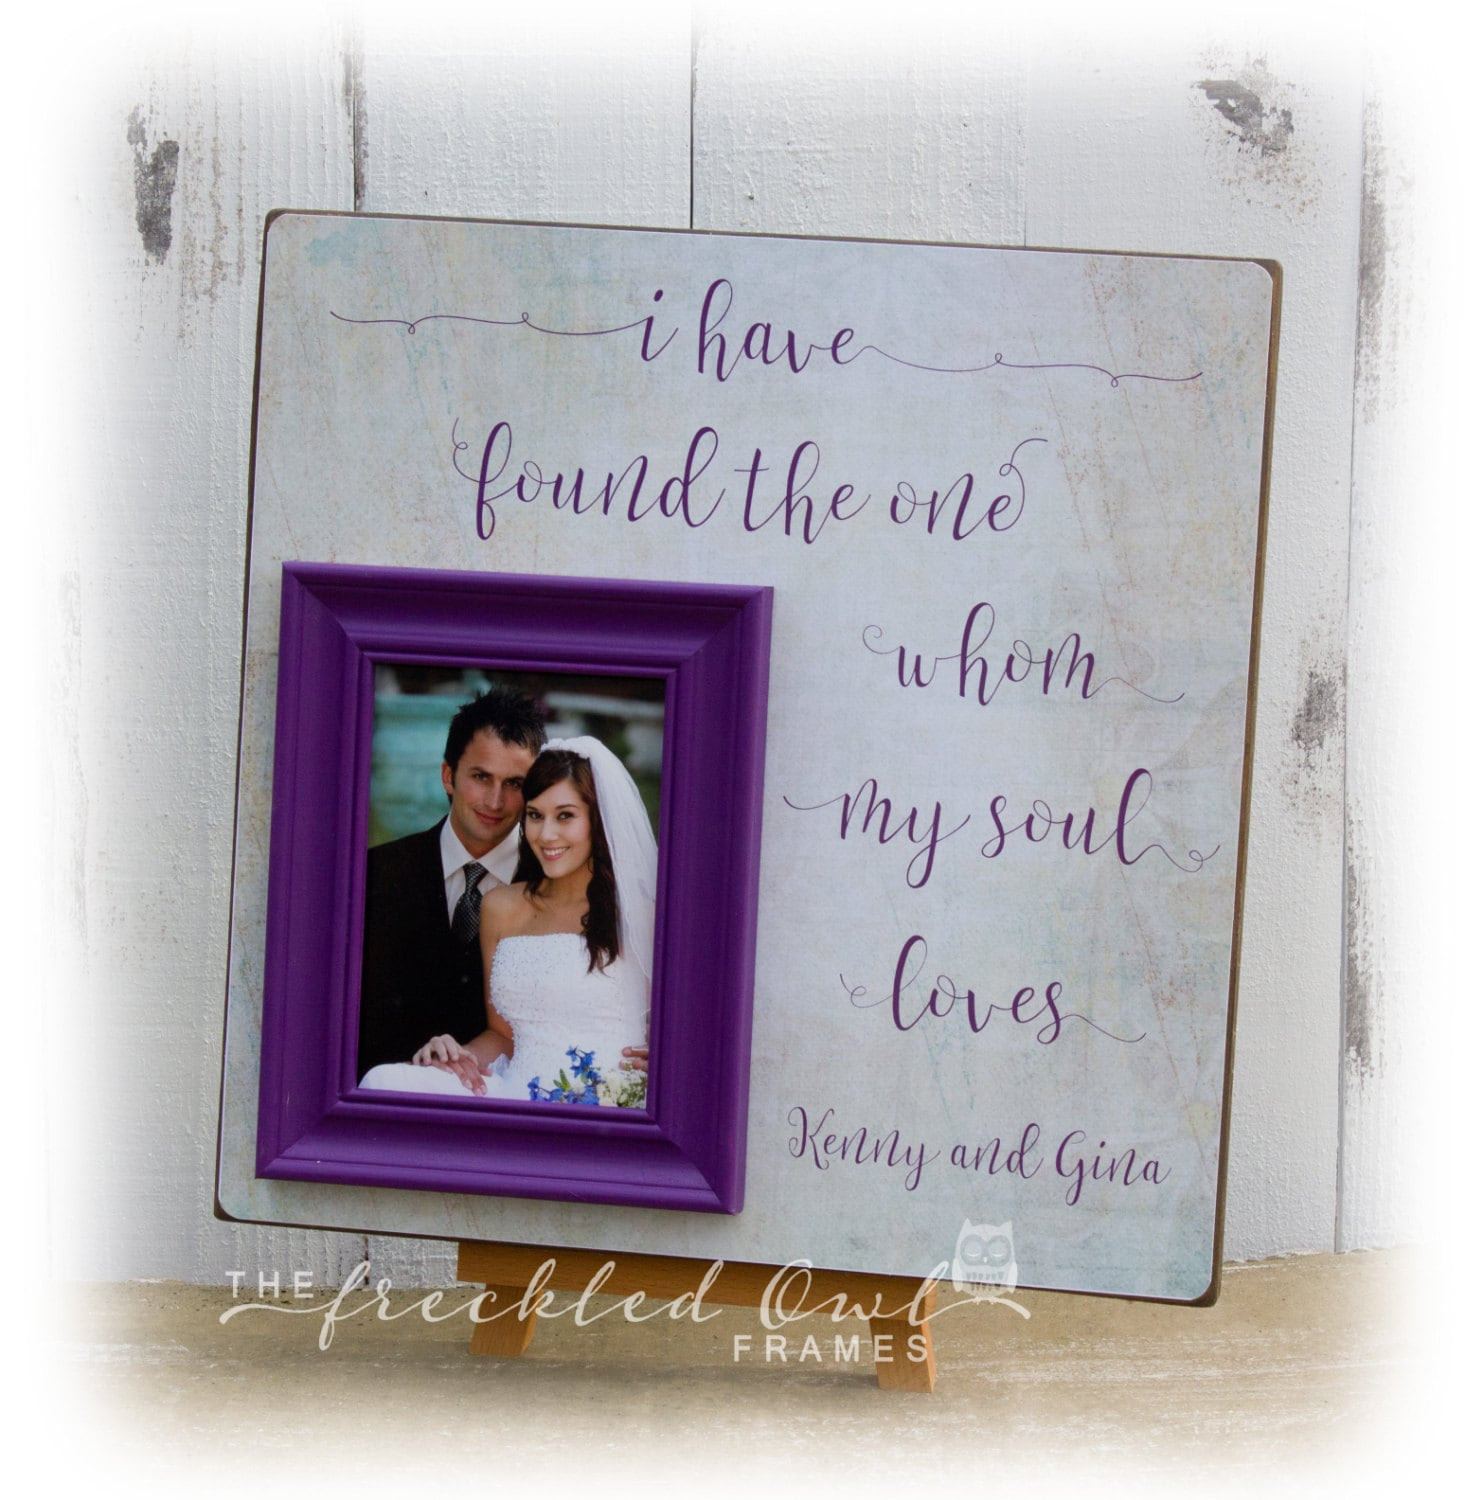 Gift Certificate Ideas For Couples
 WEDDING GIFTS for Couple Personalized Wedding Gift Ideas